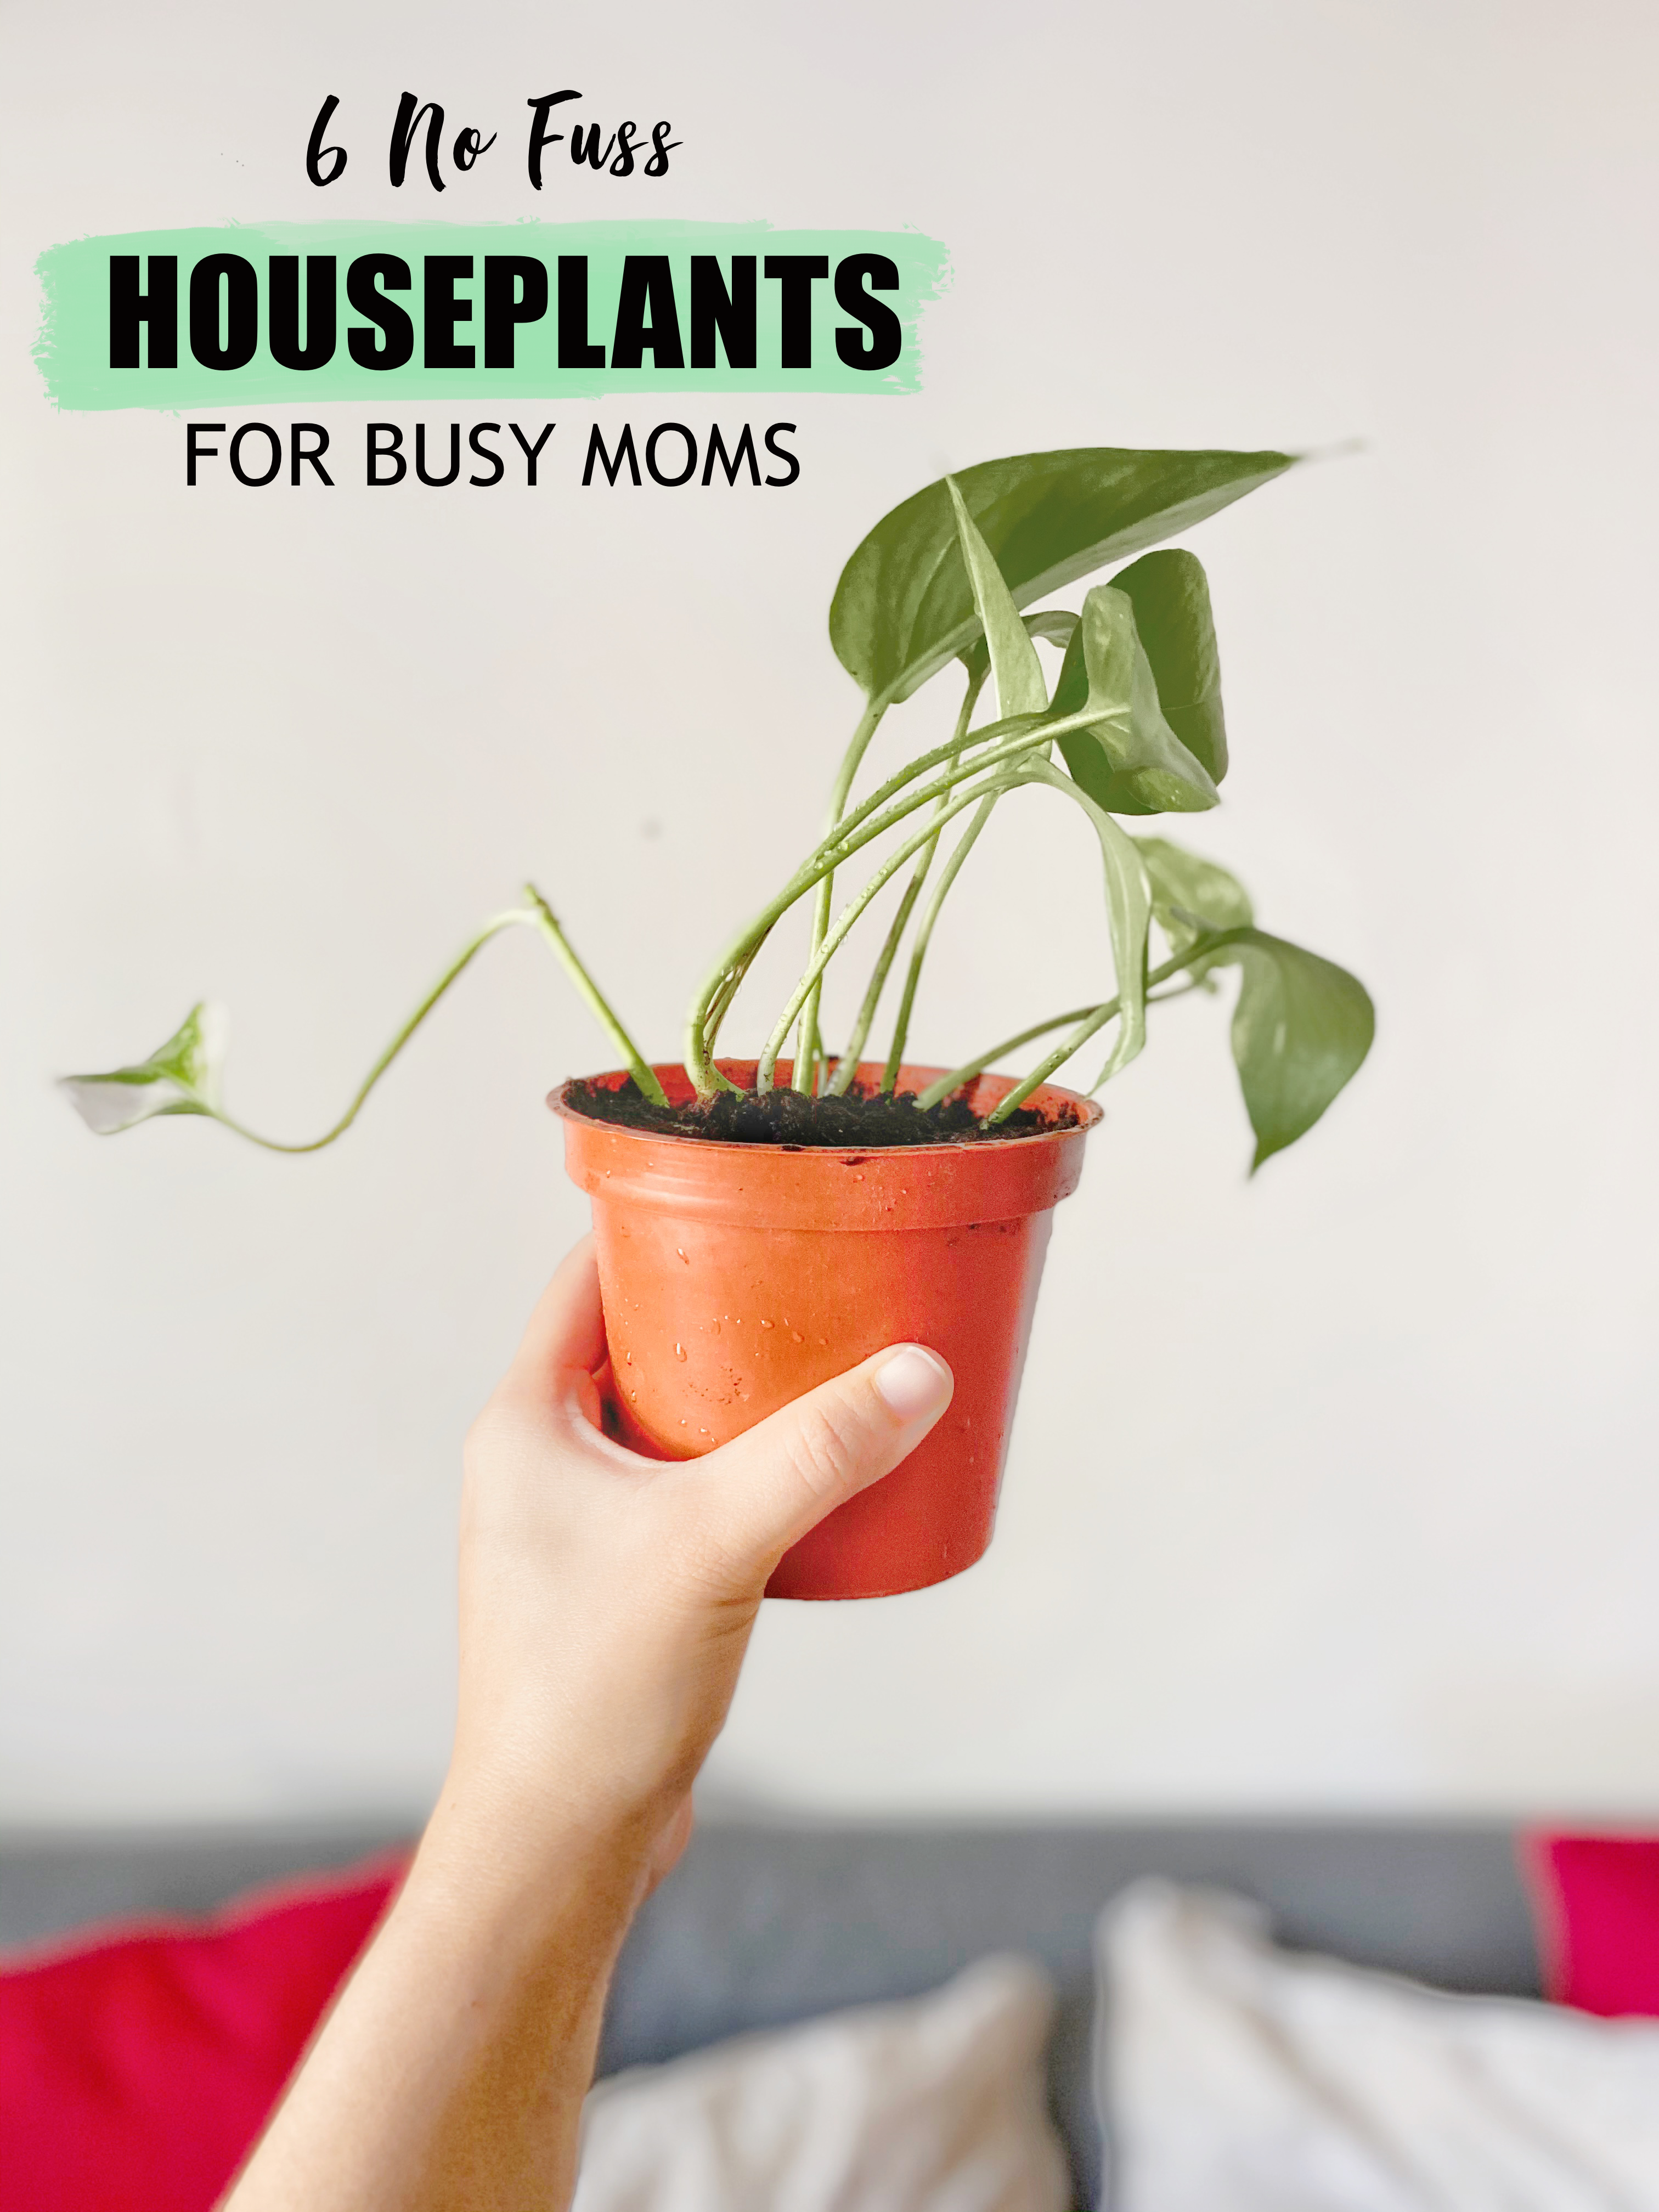 Houseplants for busy moms